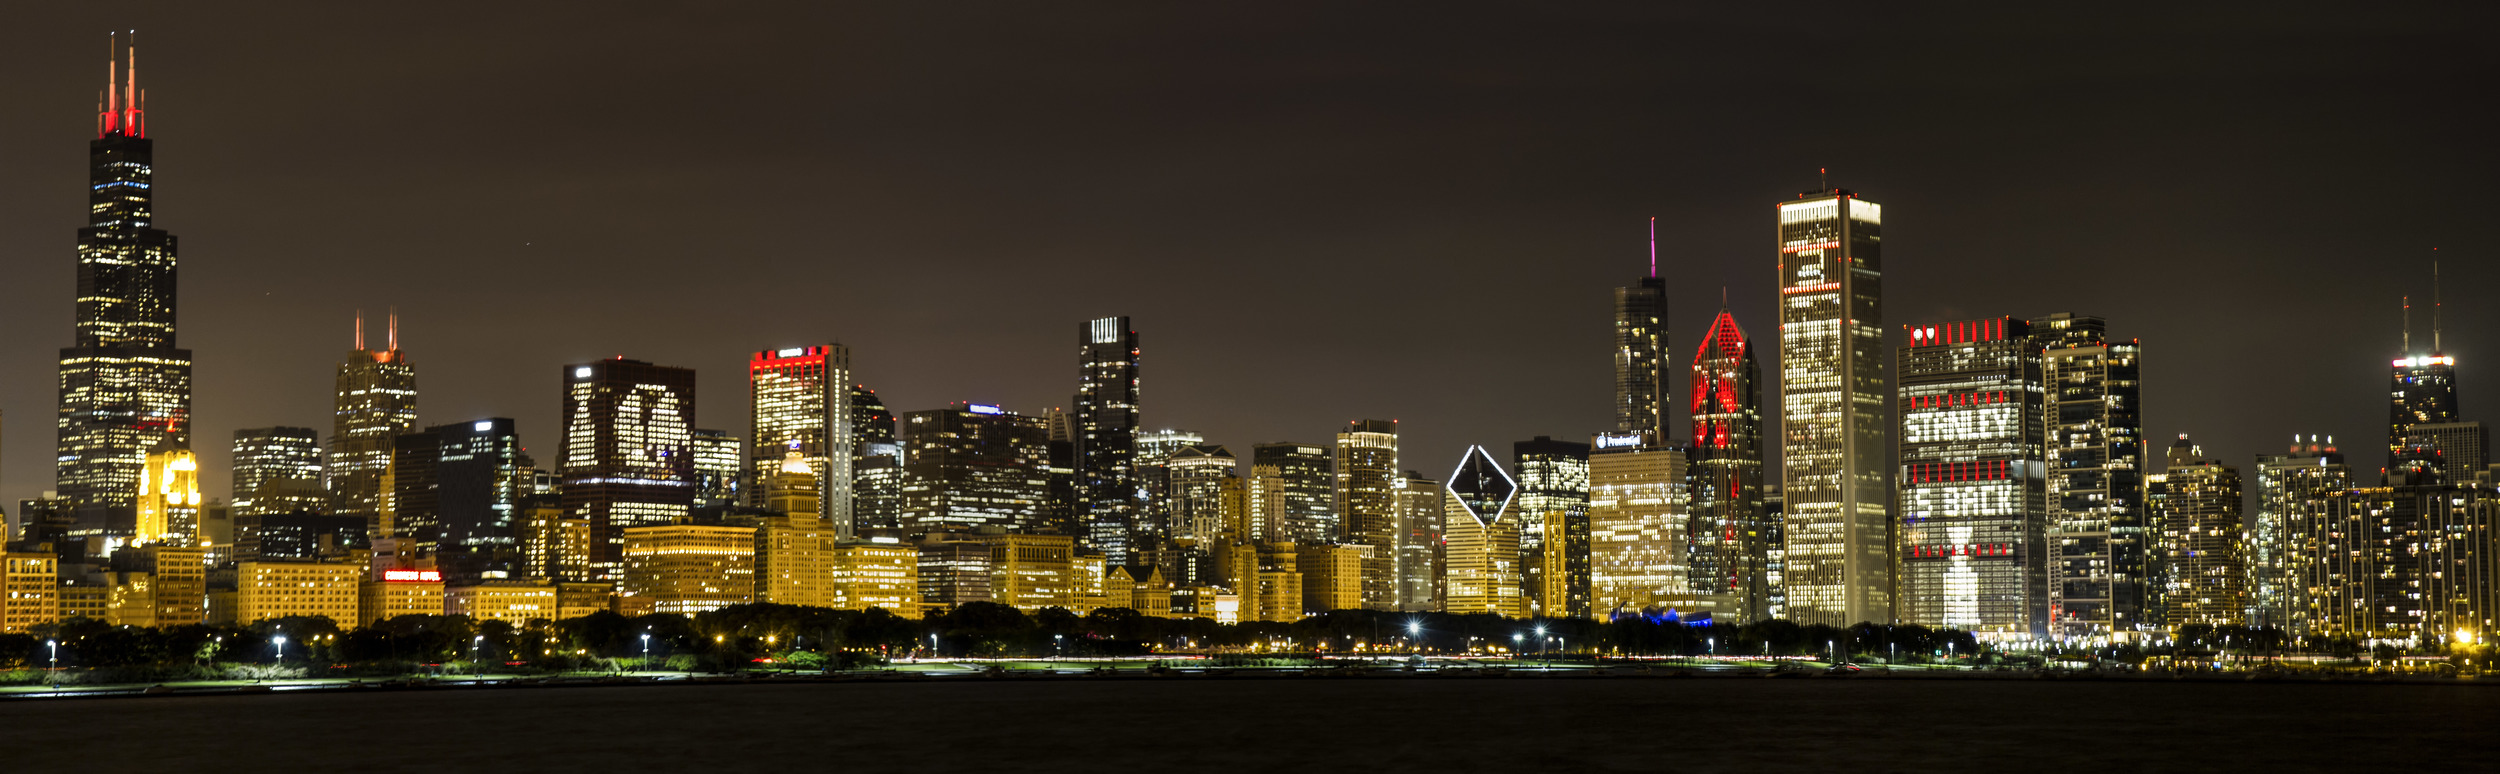    Stanley Cup Skyline 2015   